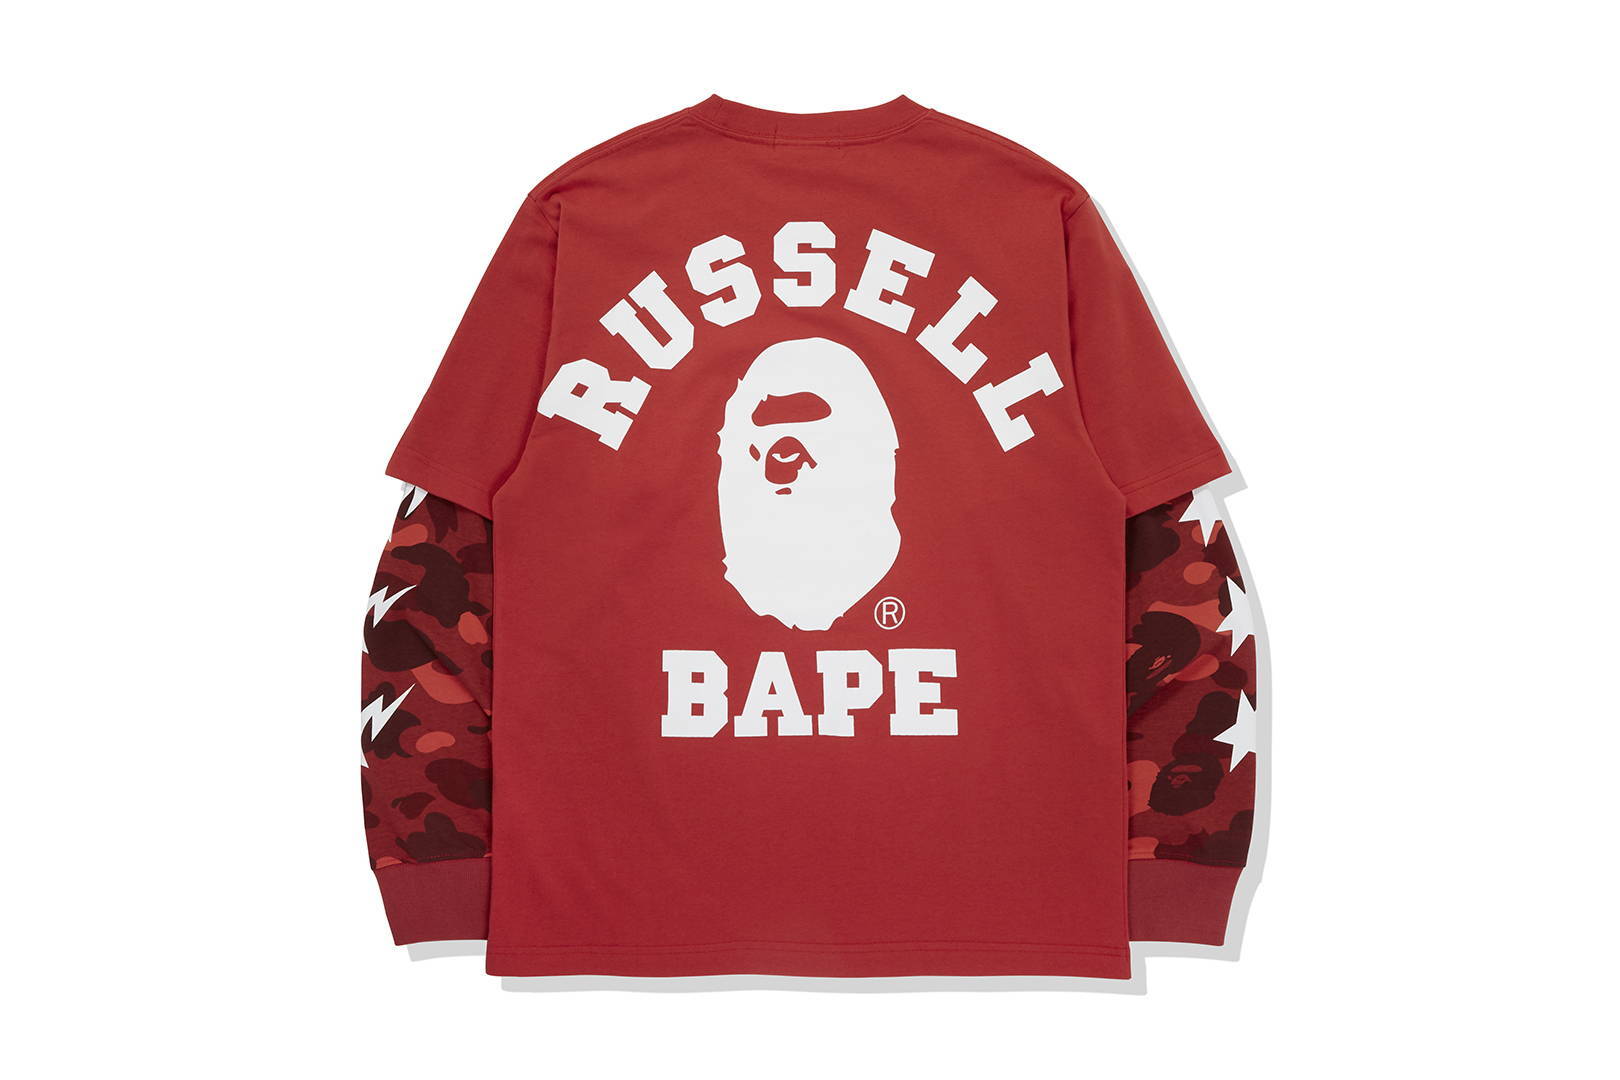 BAPE x Russell Color Camo College Layered L/S Tee Red Men's - FW20